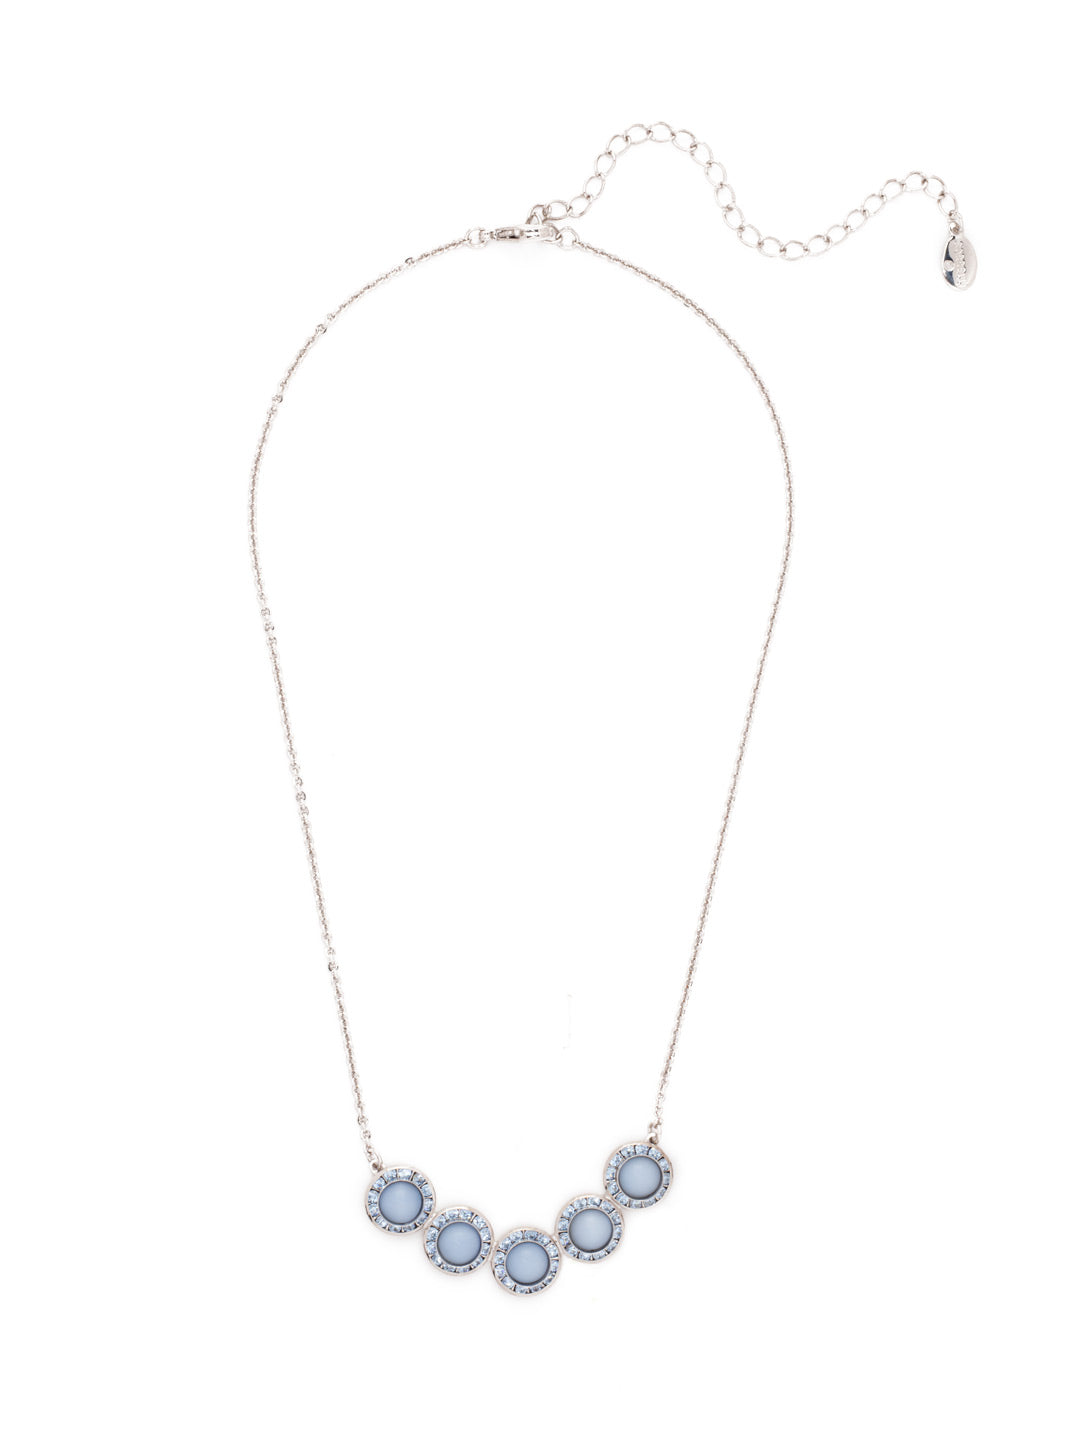 Saylor Tennis Necklace - NET14PDWNB - <p>The Saylor Tennis Necklace features a delicate chain centered with a set of sparkling circular crystal stones that shine bright. From Sorrelli's Windsor Blue collection in our Palladium finish.</p>